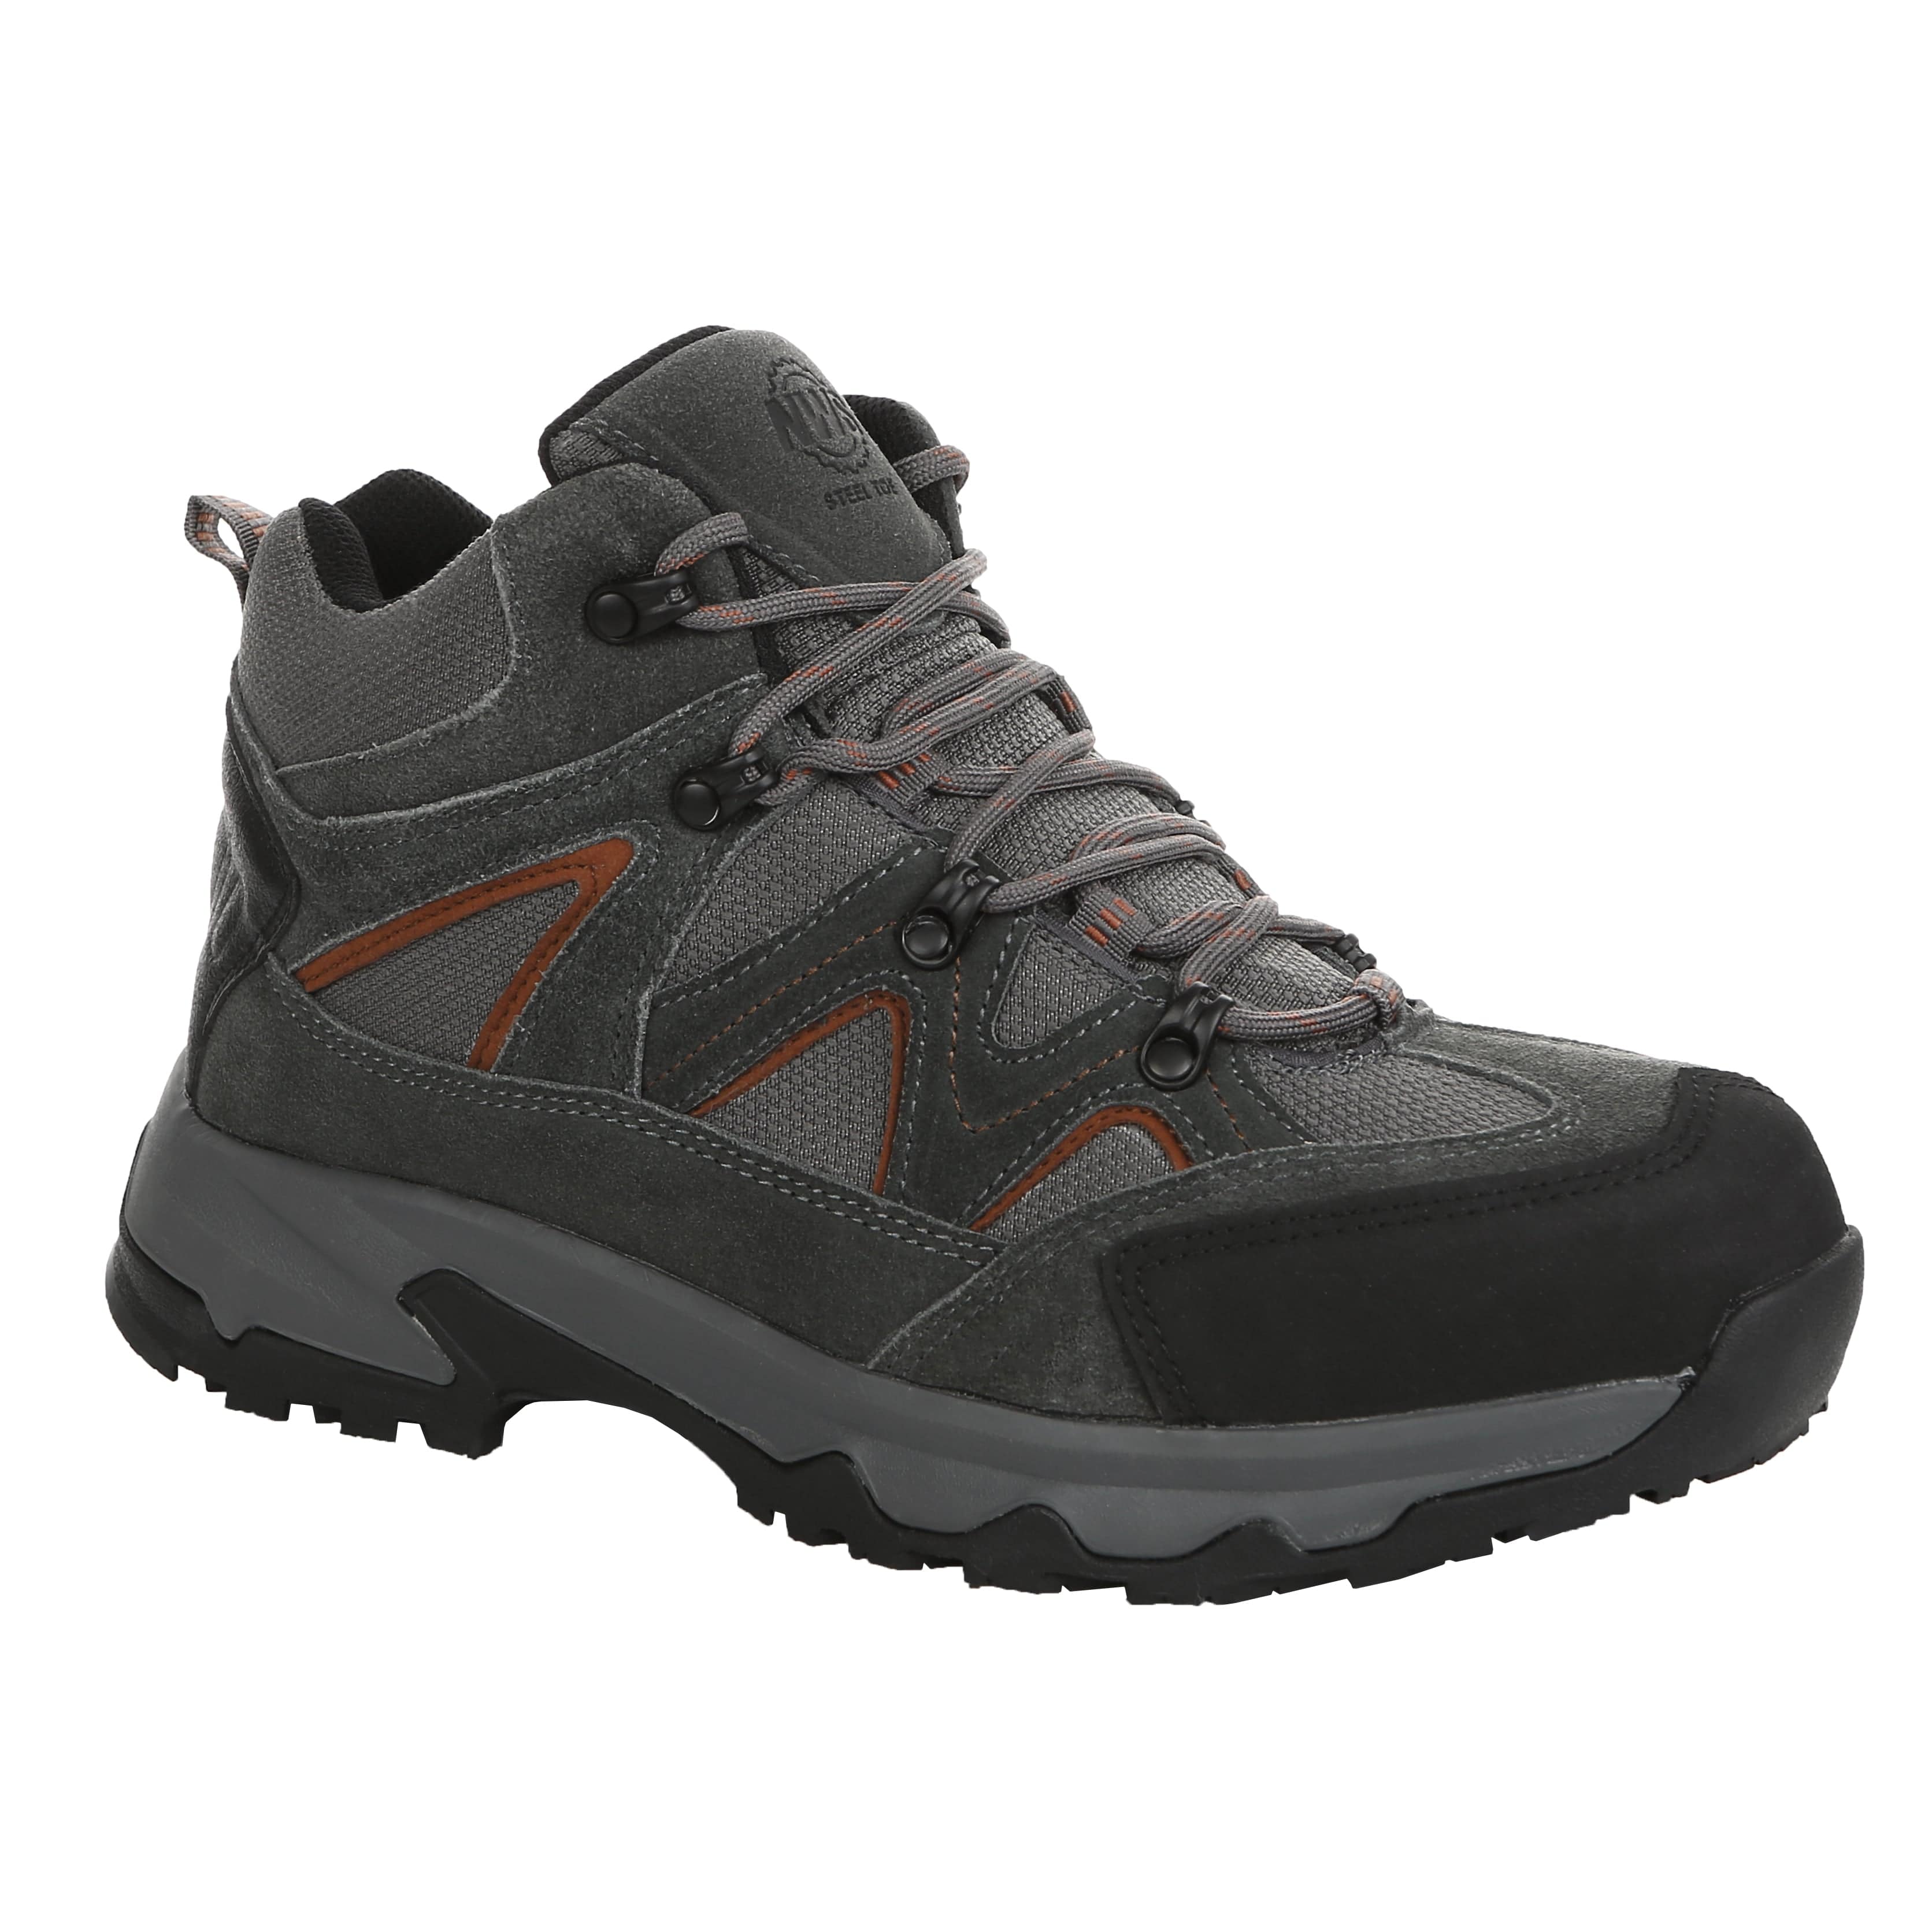 Protective steel toe work boots for men